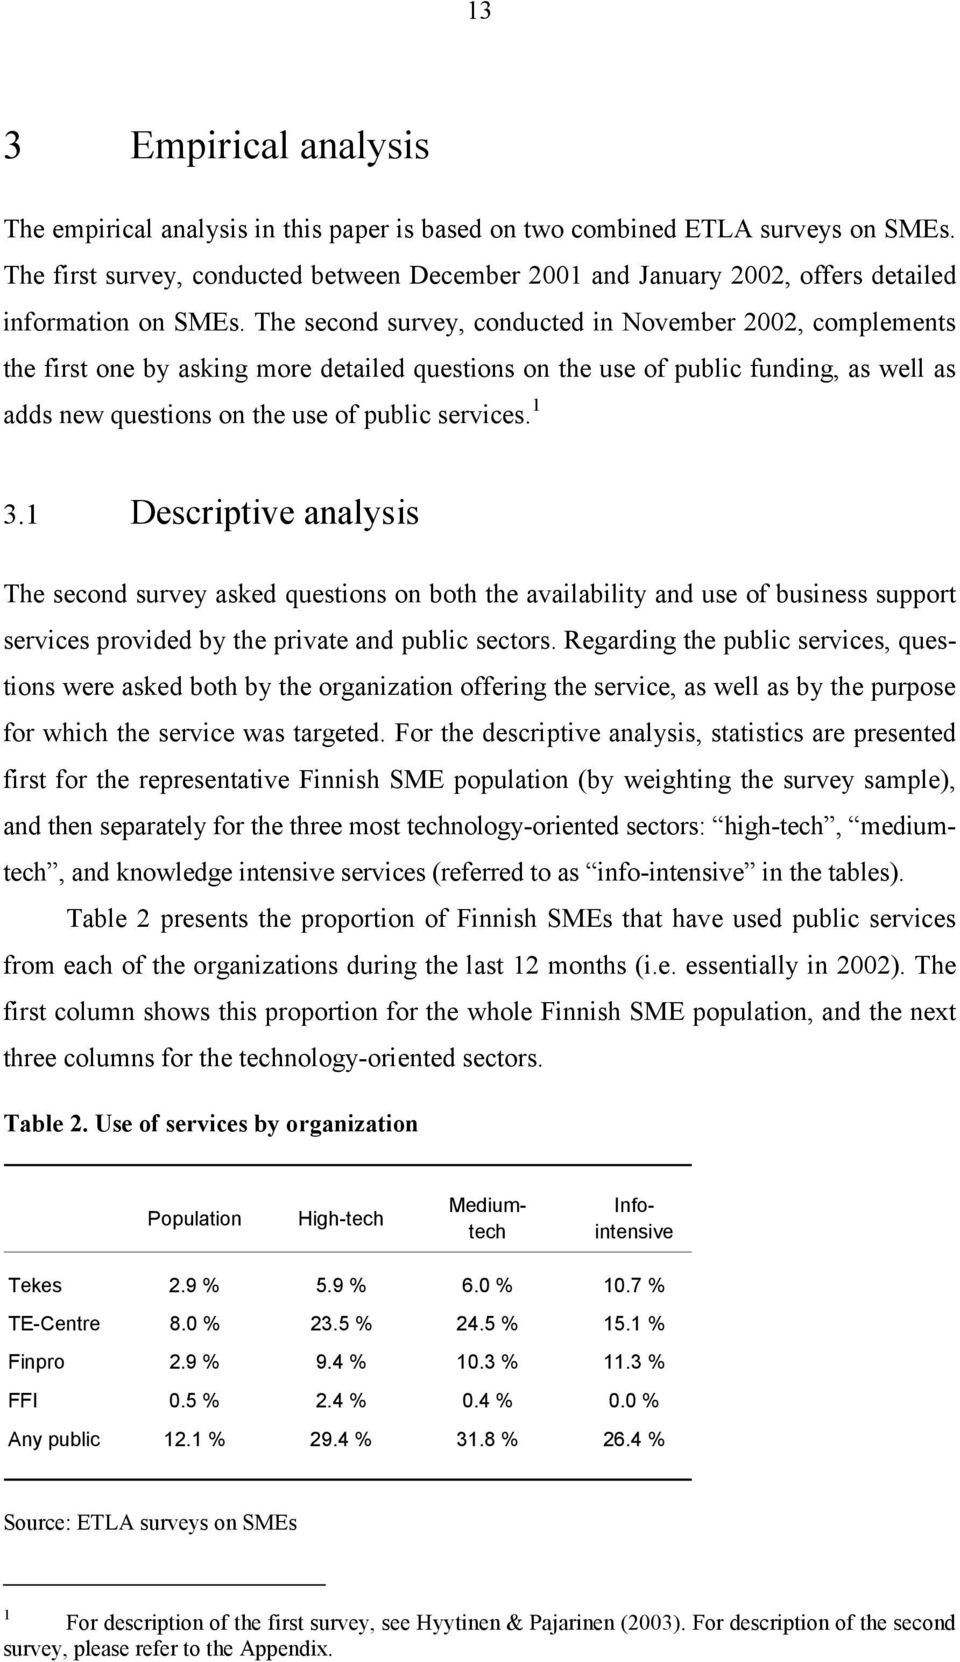 The second survey, conducted in November 2002, complements the first one by asking more detailed questions on the use of public funding, as well as adds new questions on the use of public services.